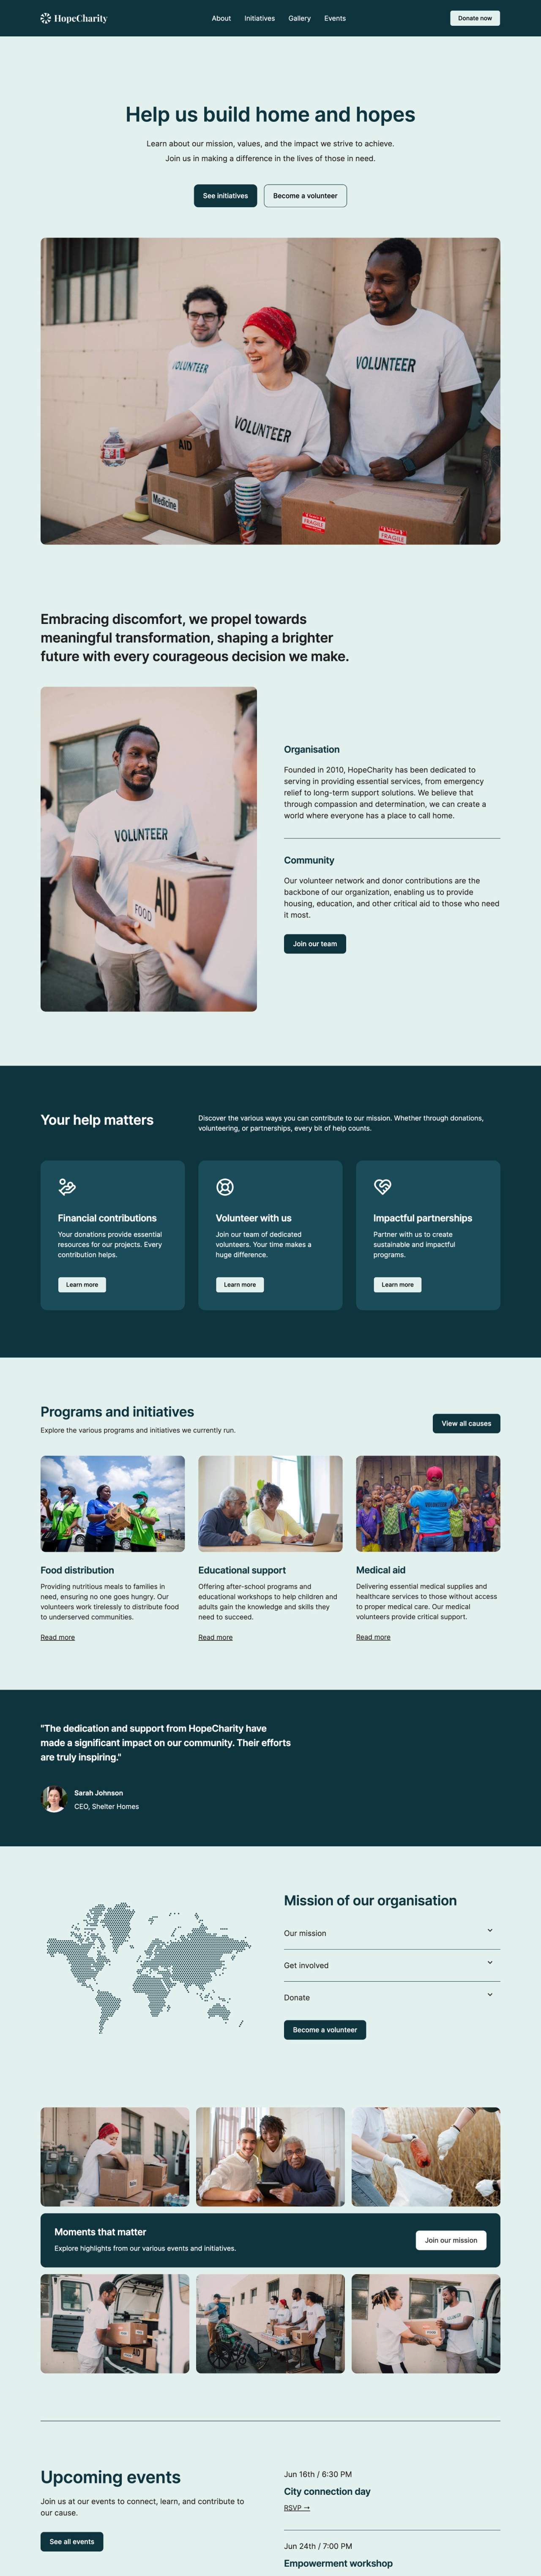 Nonprofit template - Made by MailerLite